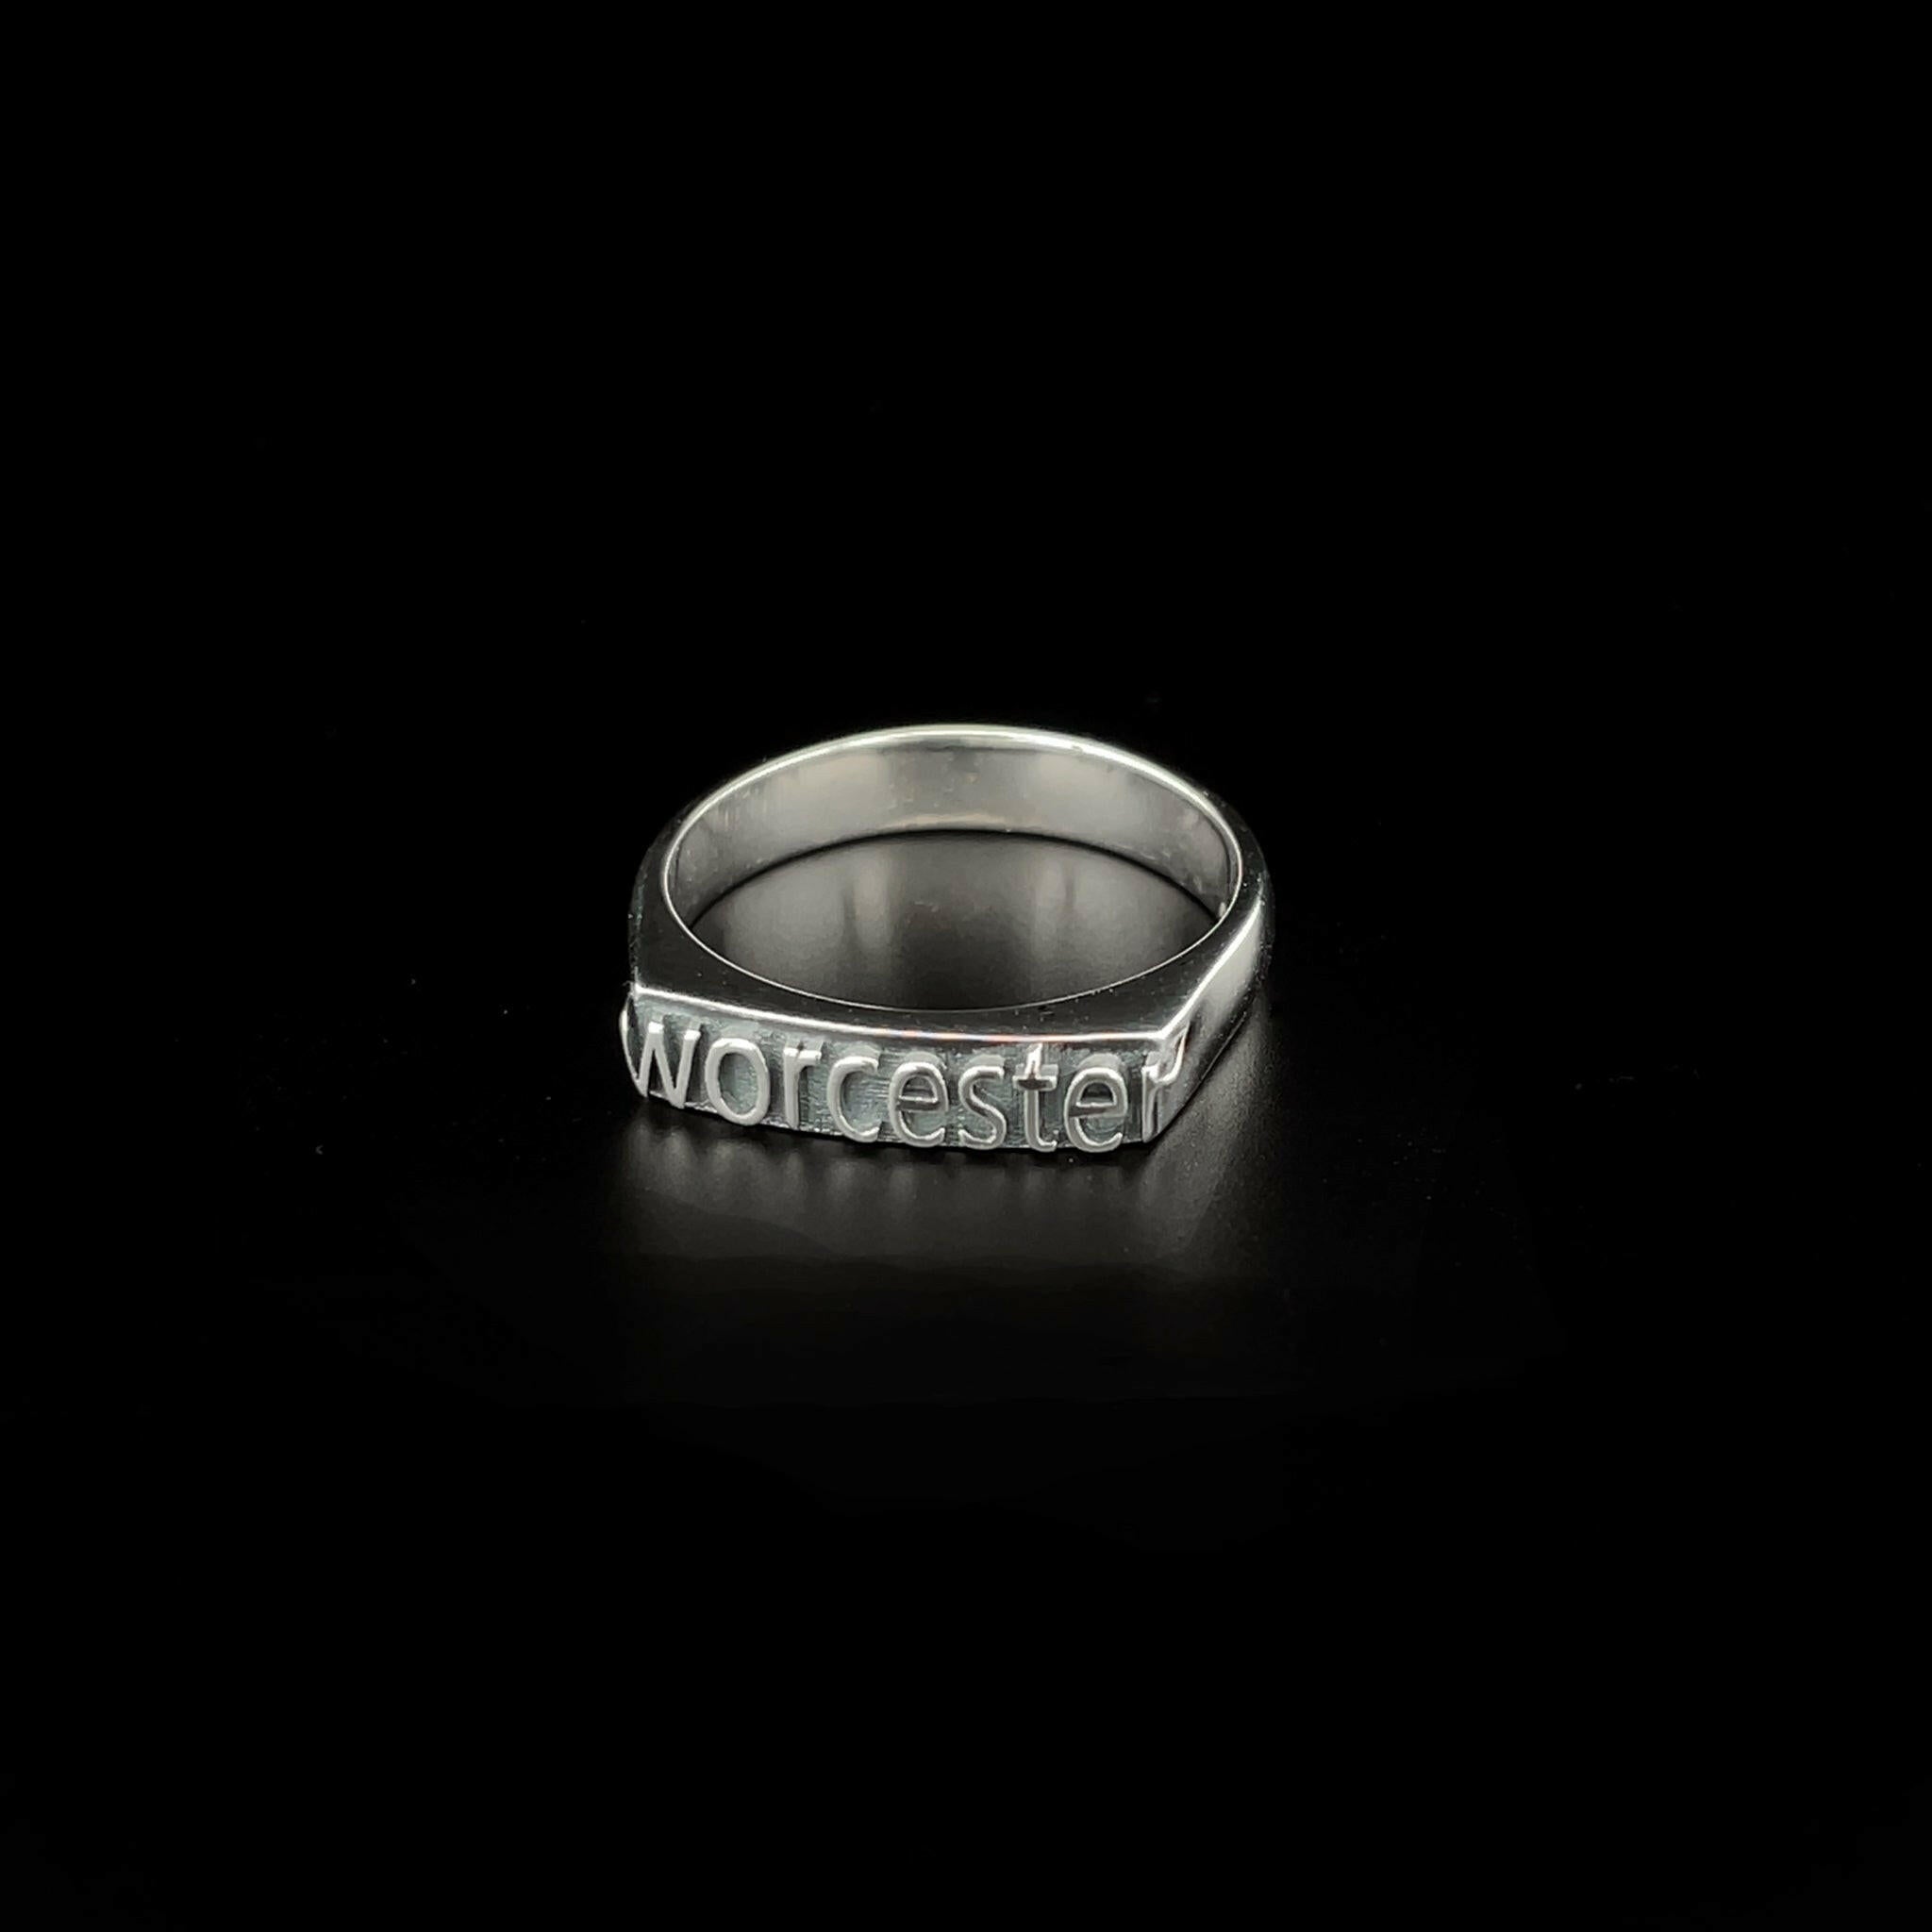 slightly right angled sterling silver ring with text that reads "Worcester"